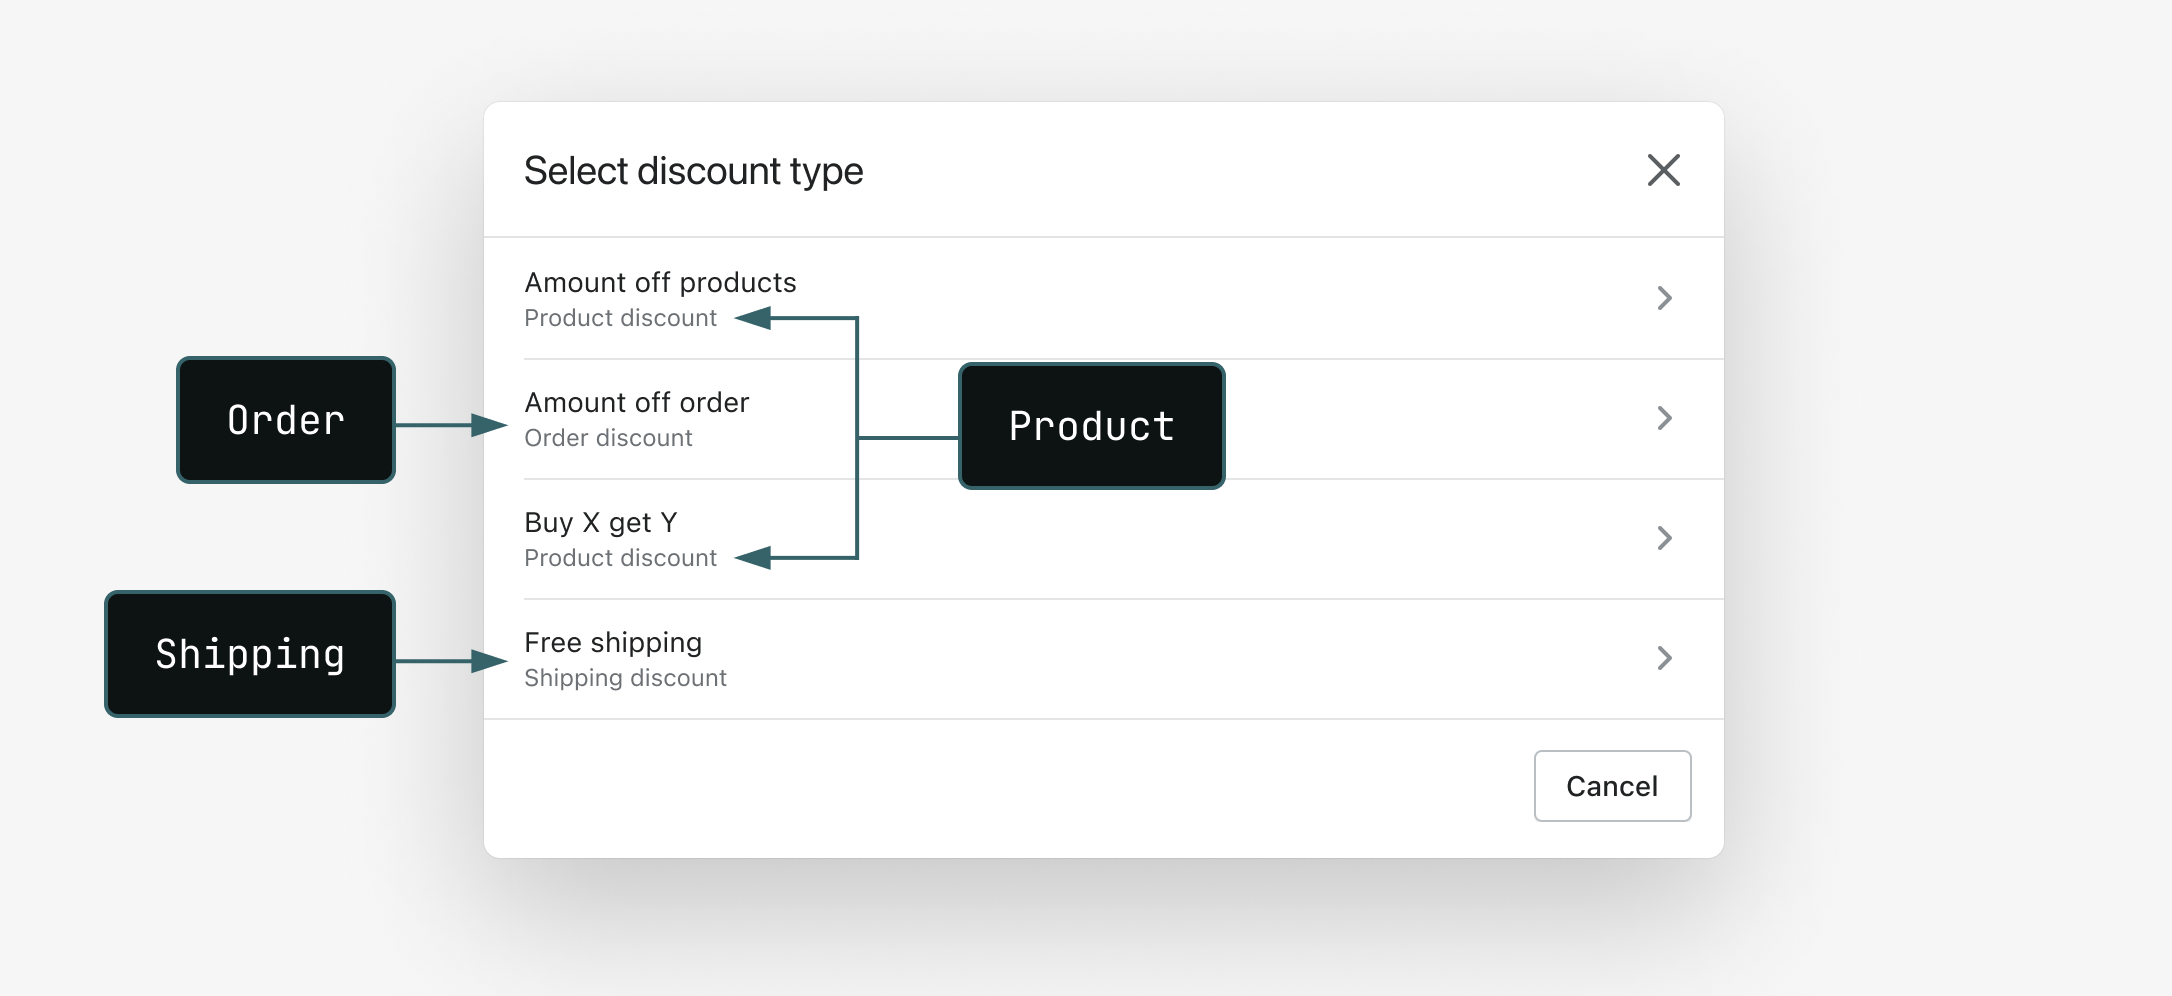 An image showing the different discount types a user can create.